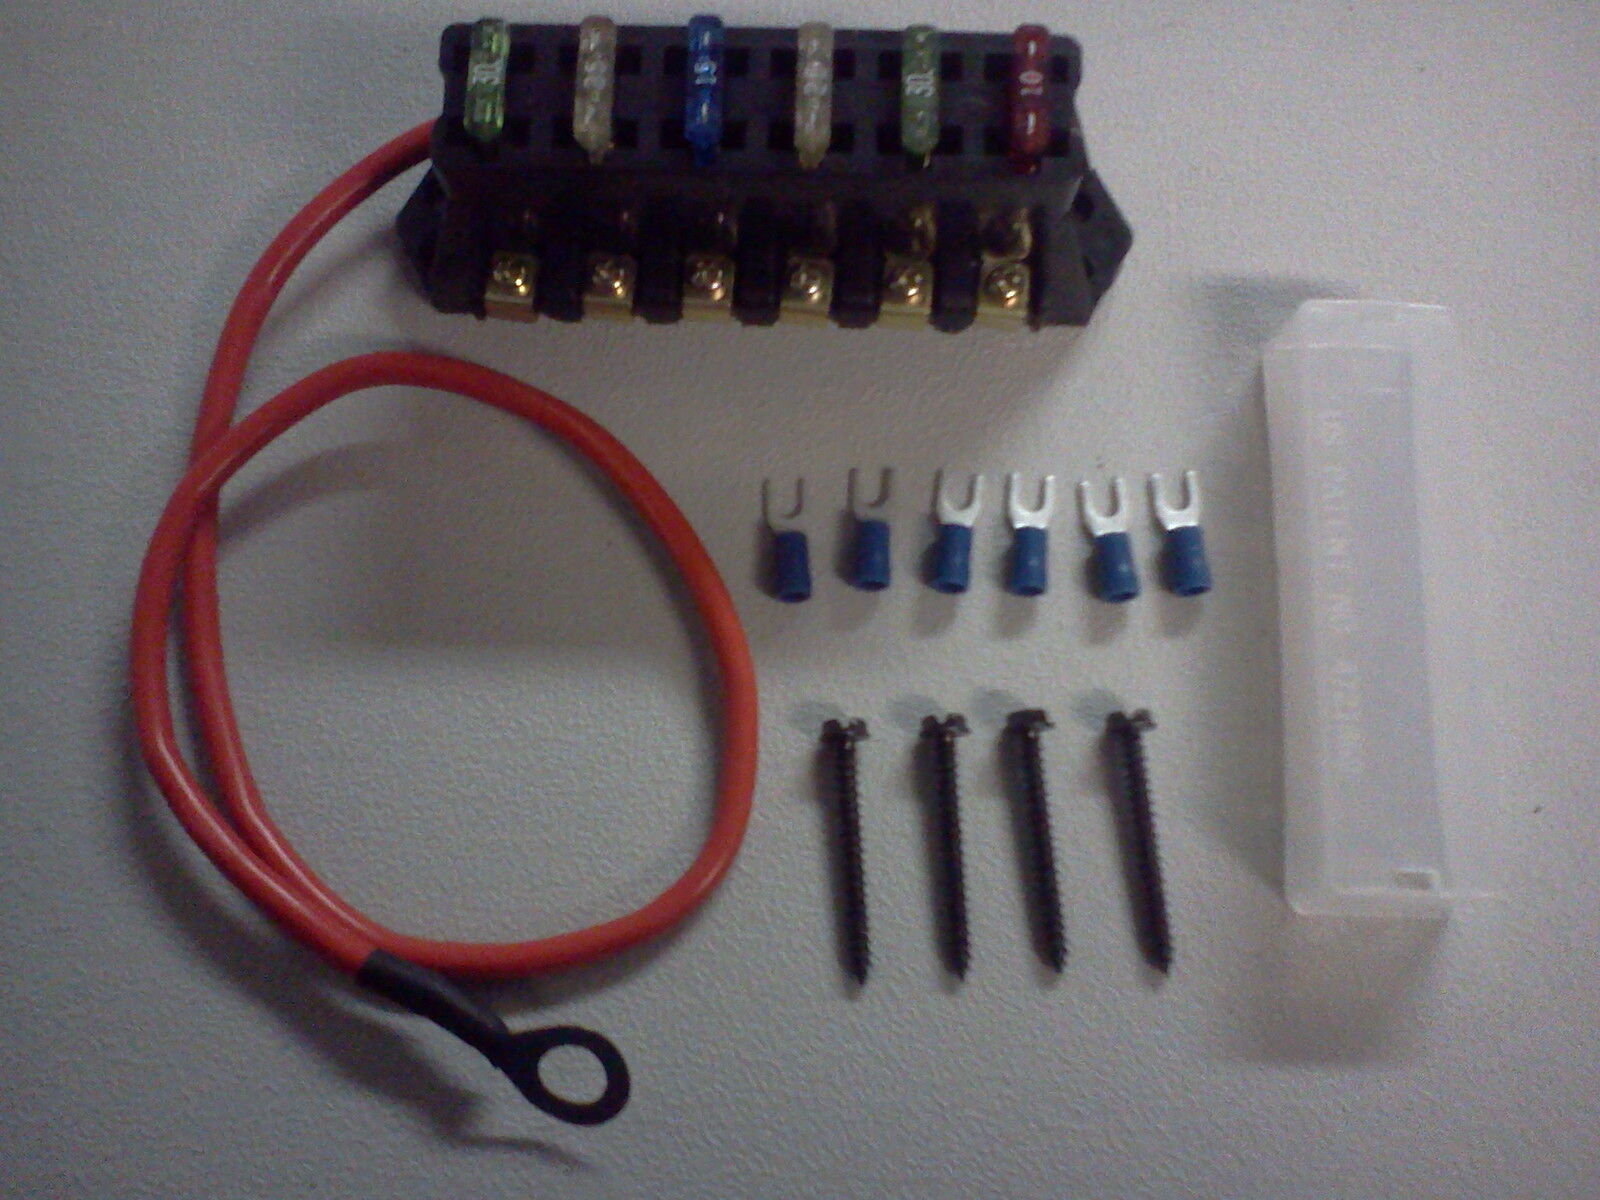 6 CIRCUIT ATC/ATO RAISED FUSE BLOCK PANEL KIT WITH 8AWG HOT WIRE LEAD CAR TRUCK